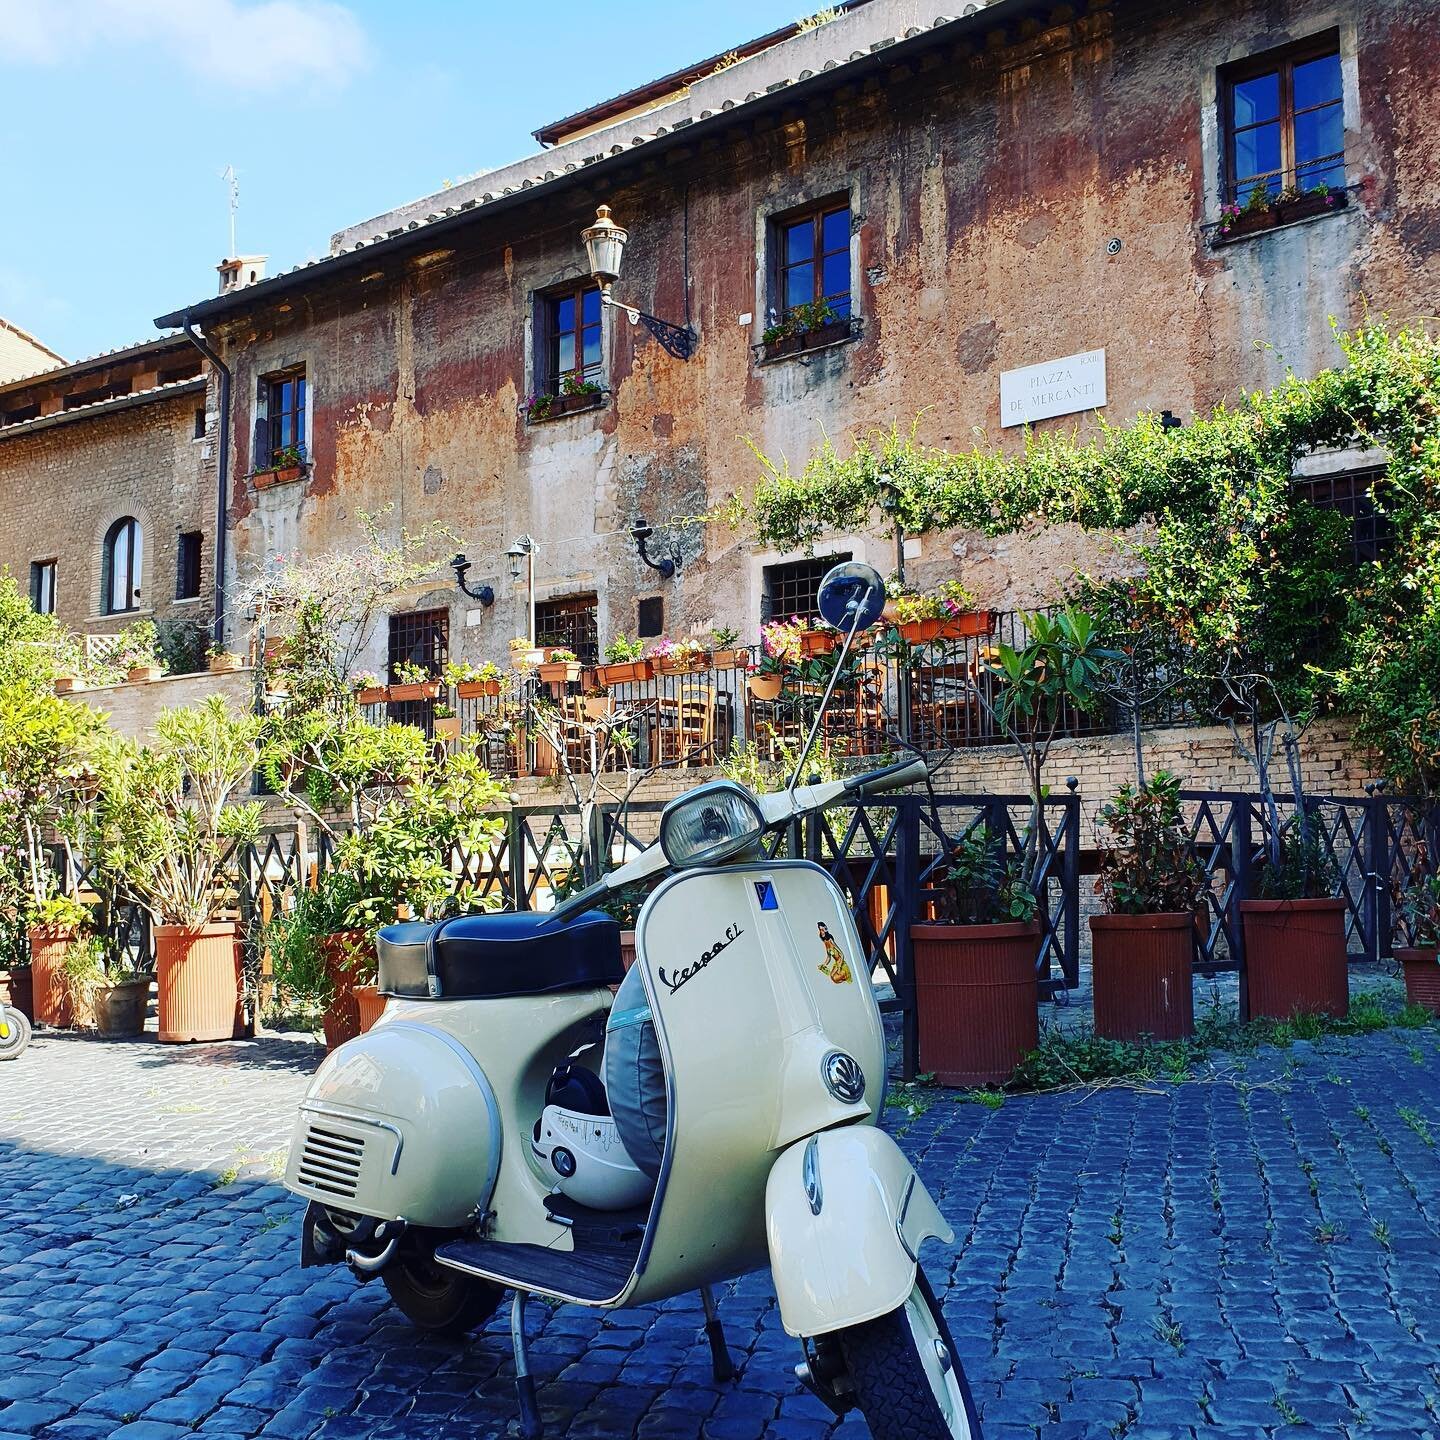 Who&rsquo;s ready to grab a Vespa as soon as Italy 🇮🇹 reopens !!

We have so many unique  and fun experiences to offer you and your family when it&rsquo;s time to finally fly the friendly skies. 

When the time is right .....
 
#aboveandbeyondtrave